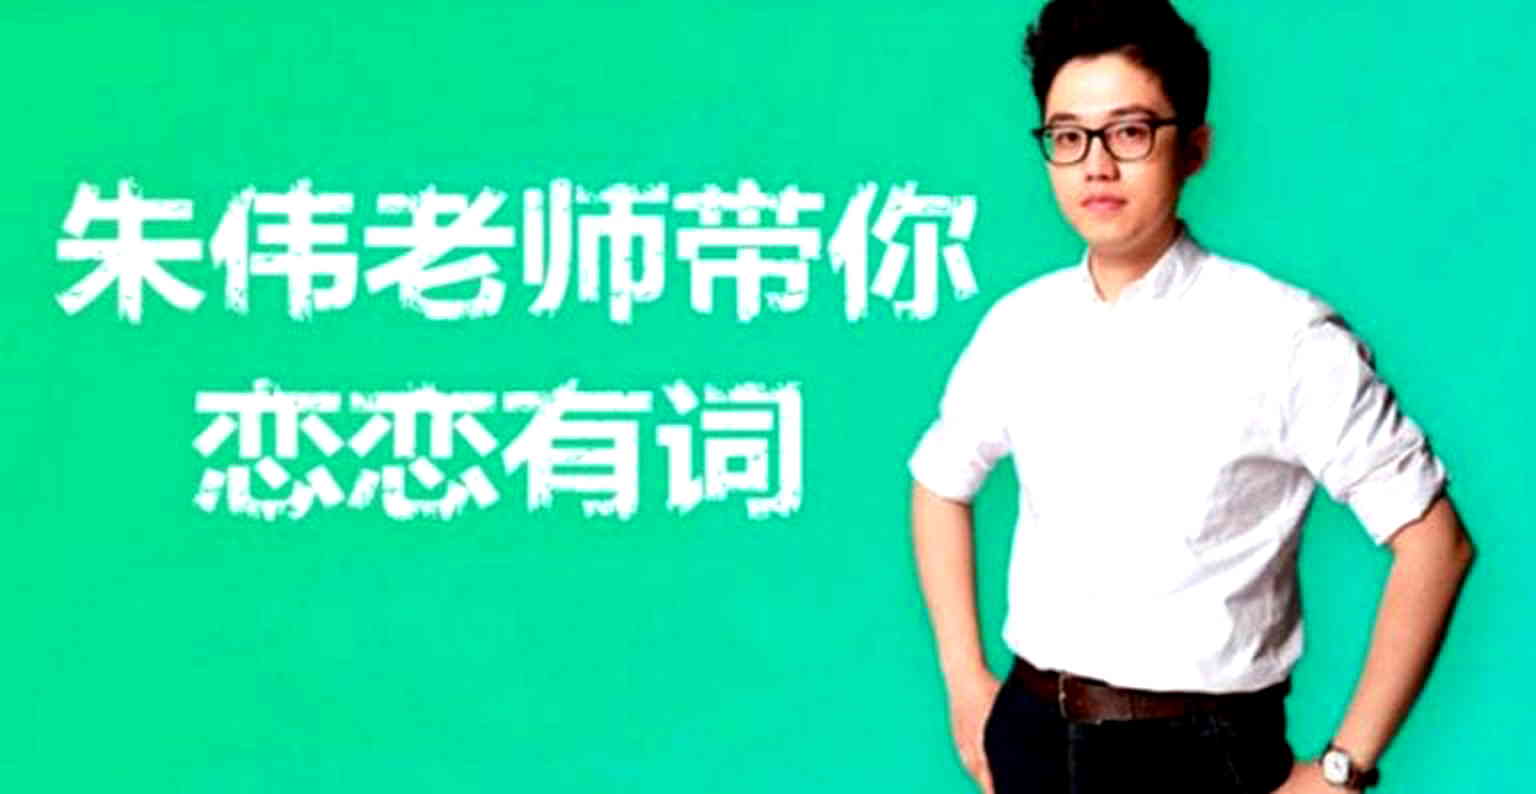 English Teacher in China Makes Nearly $2 Million Selling Lessons Online